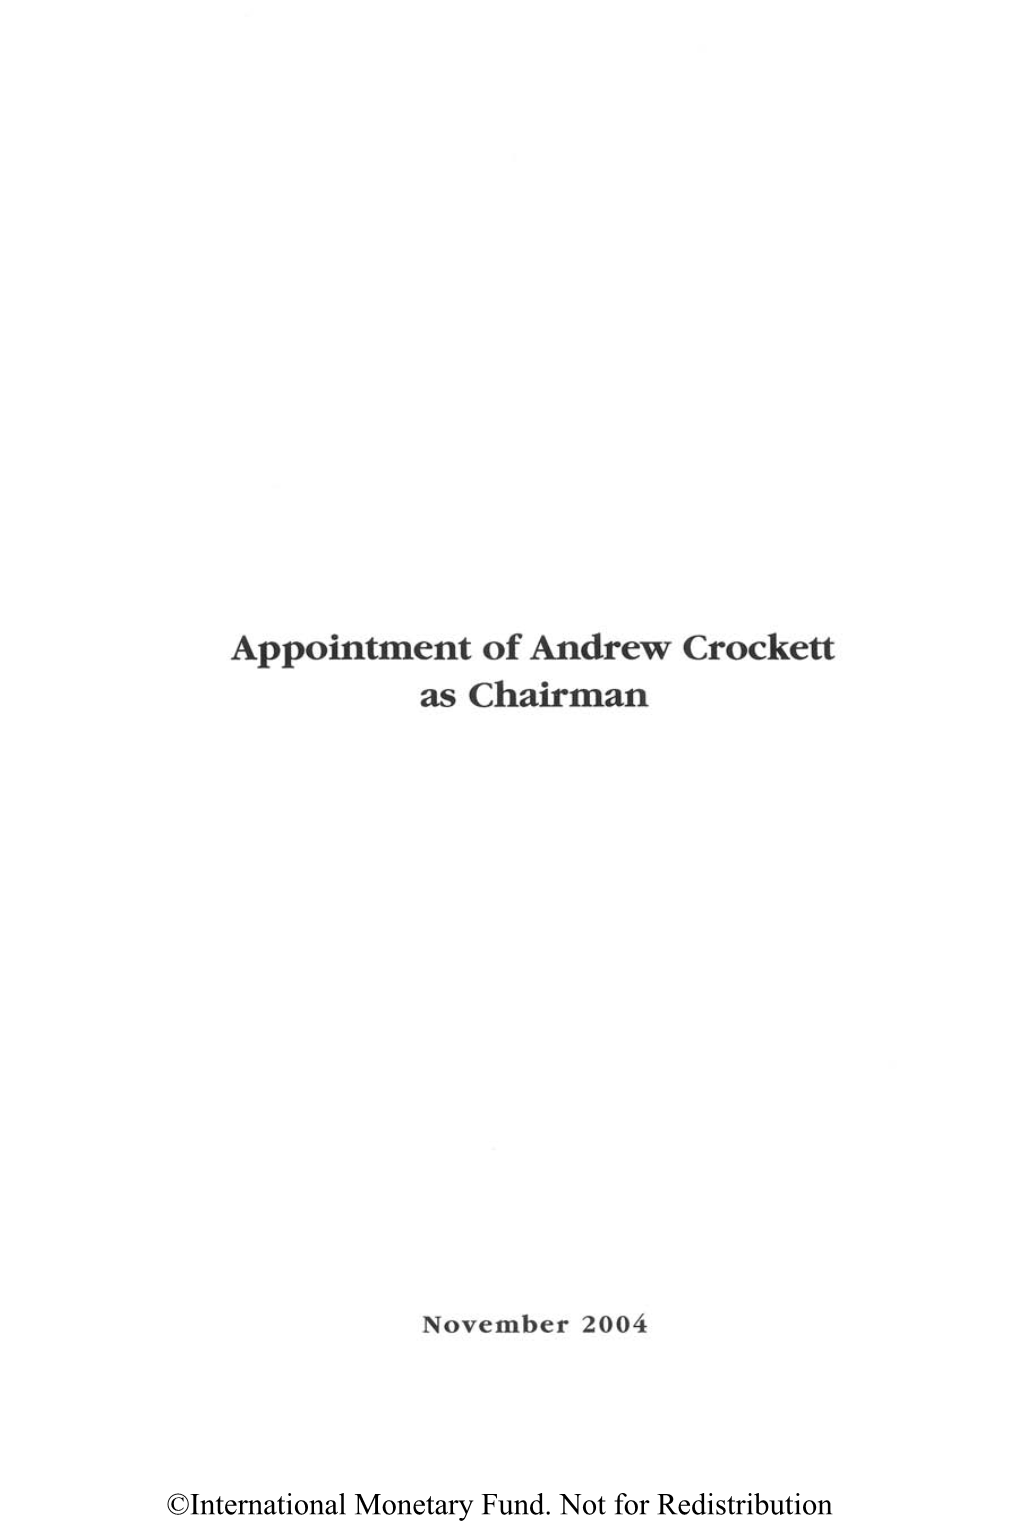 Appointment of Andrew Crockett As Chairman